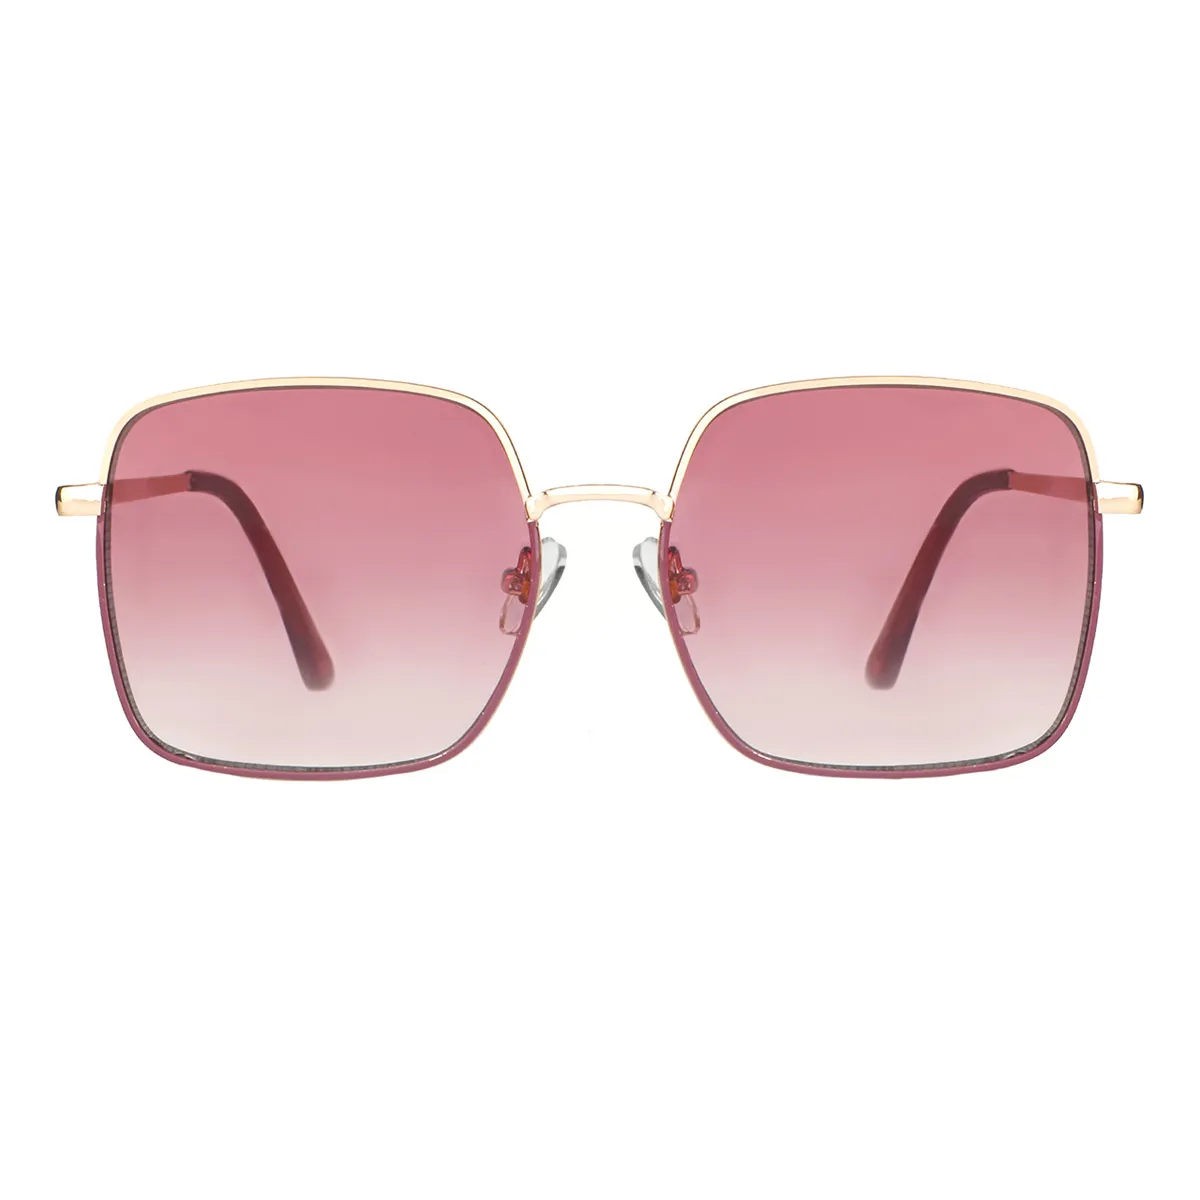 Fashion Square Pink-Gold  Sunglasses for Women